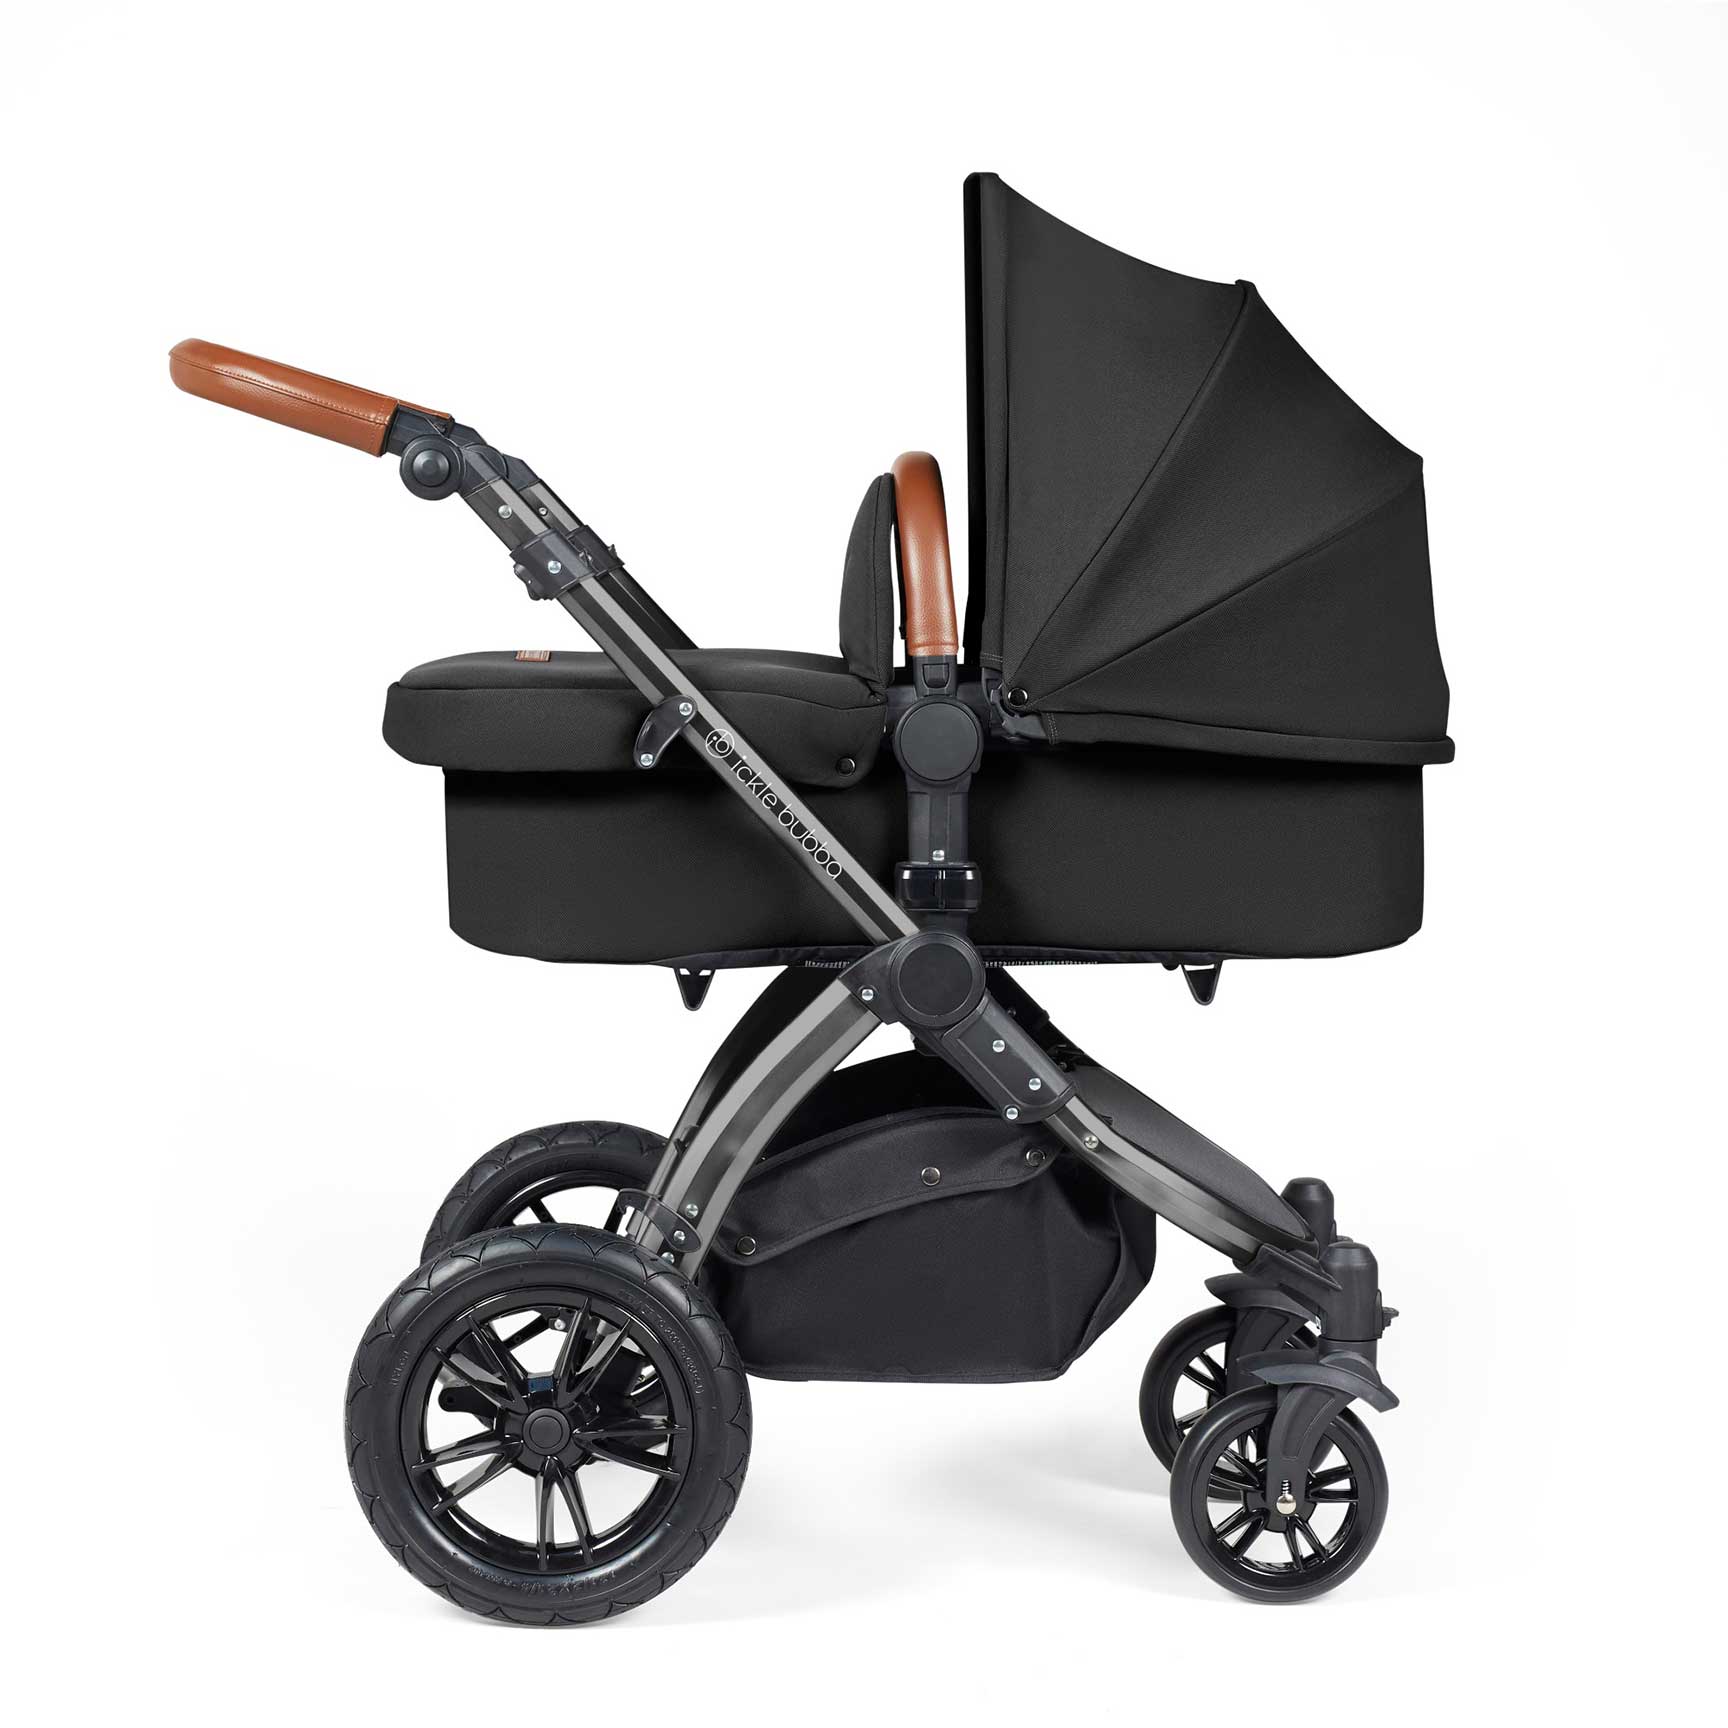 Ickle Bubba travel systems Ickle Bubba Stomp Luxe 2 in 1 Plus Pushchair & Carrycot - Black/Midnight/Tan 10-003-001-203